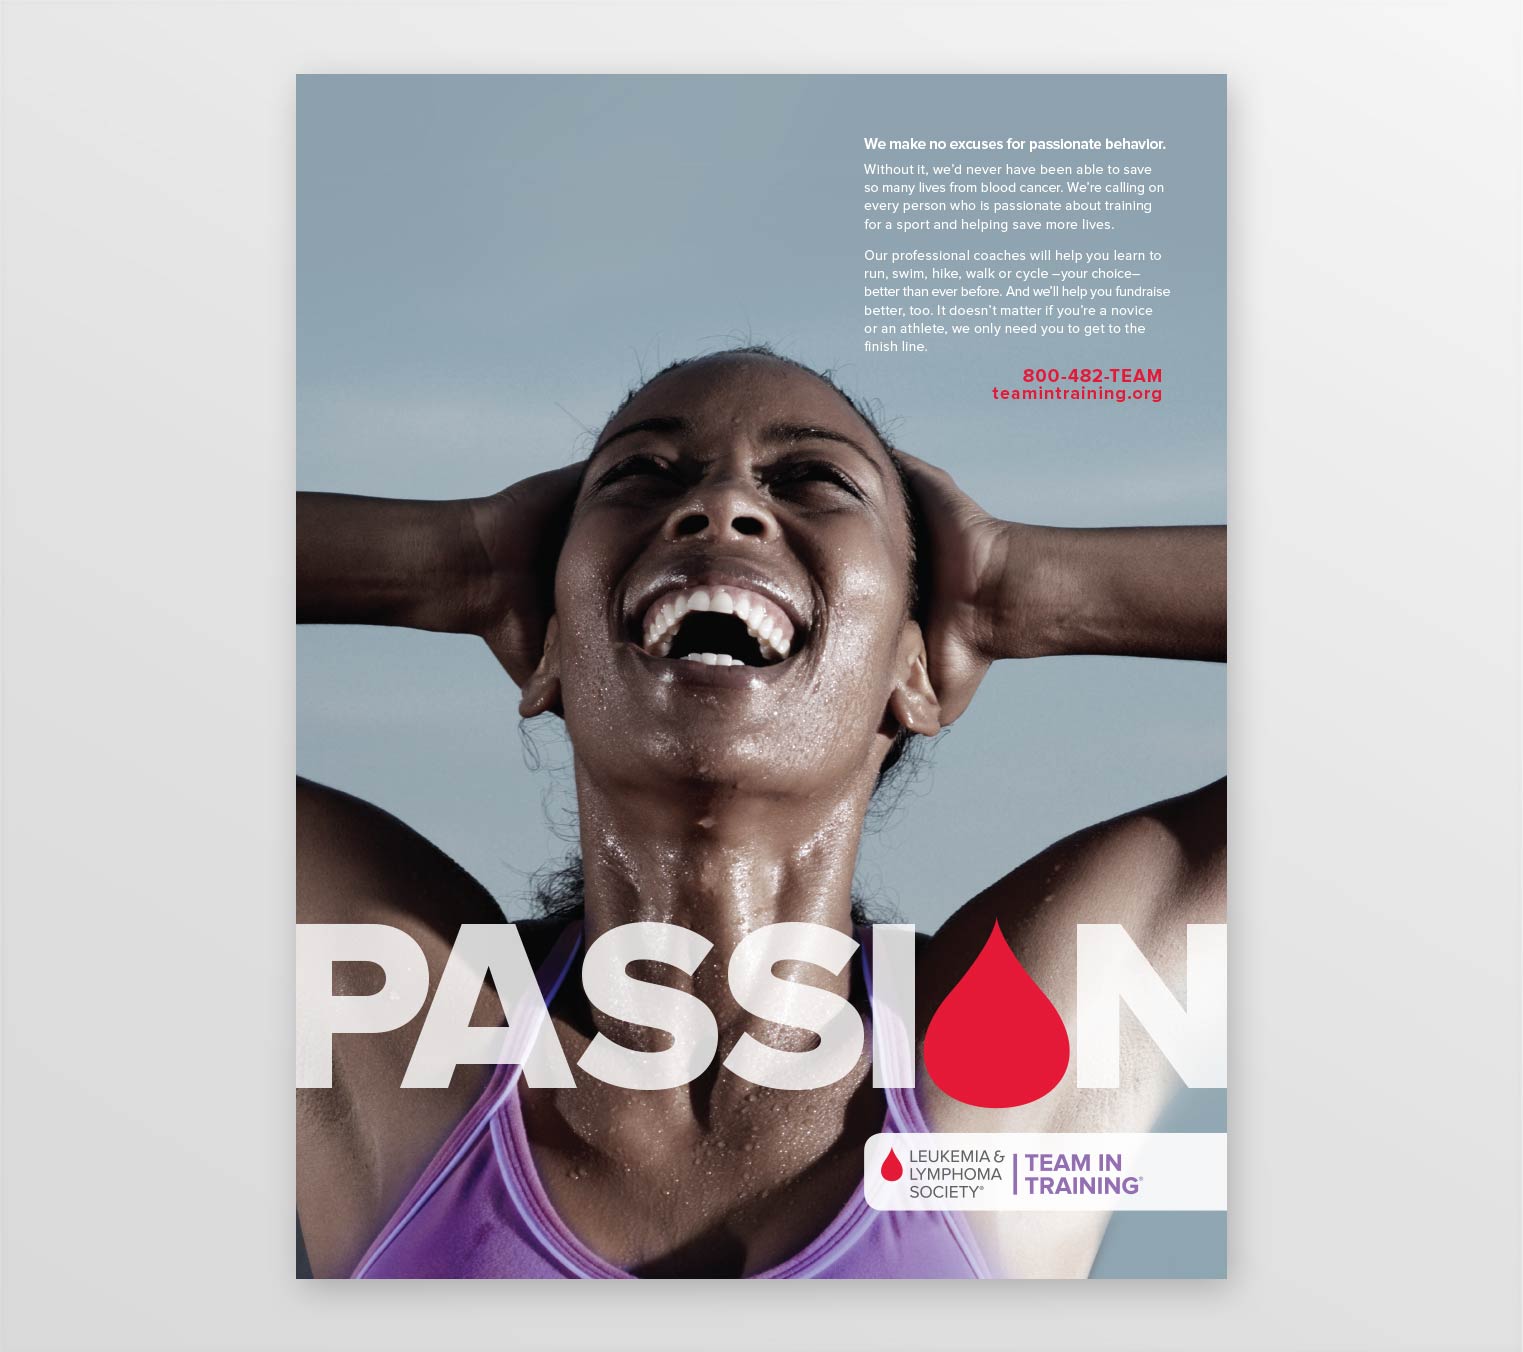 Leukemia Lymphoma Society Team In Training print advertising featuring young female runner happy after a long run